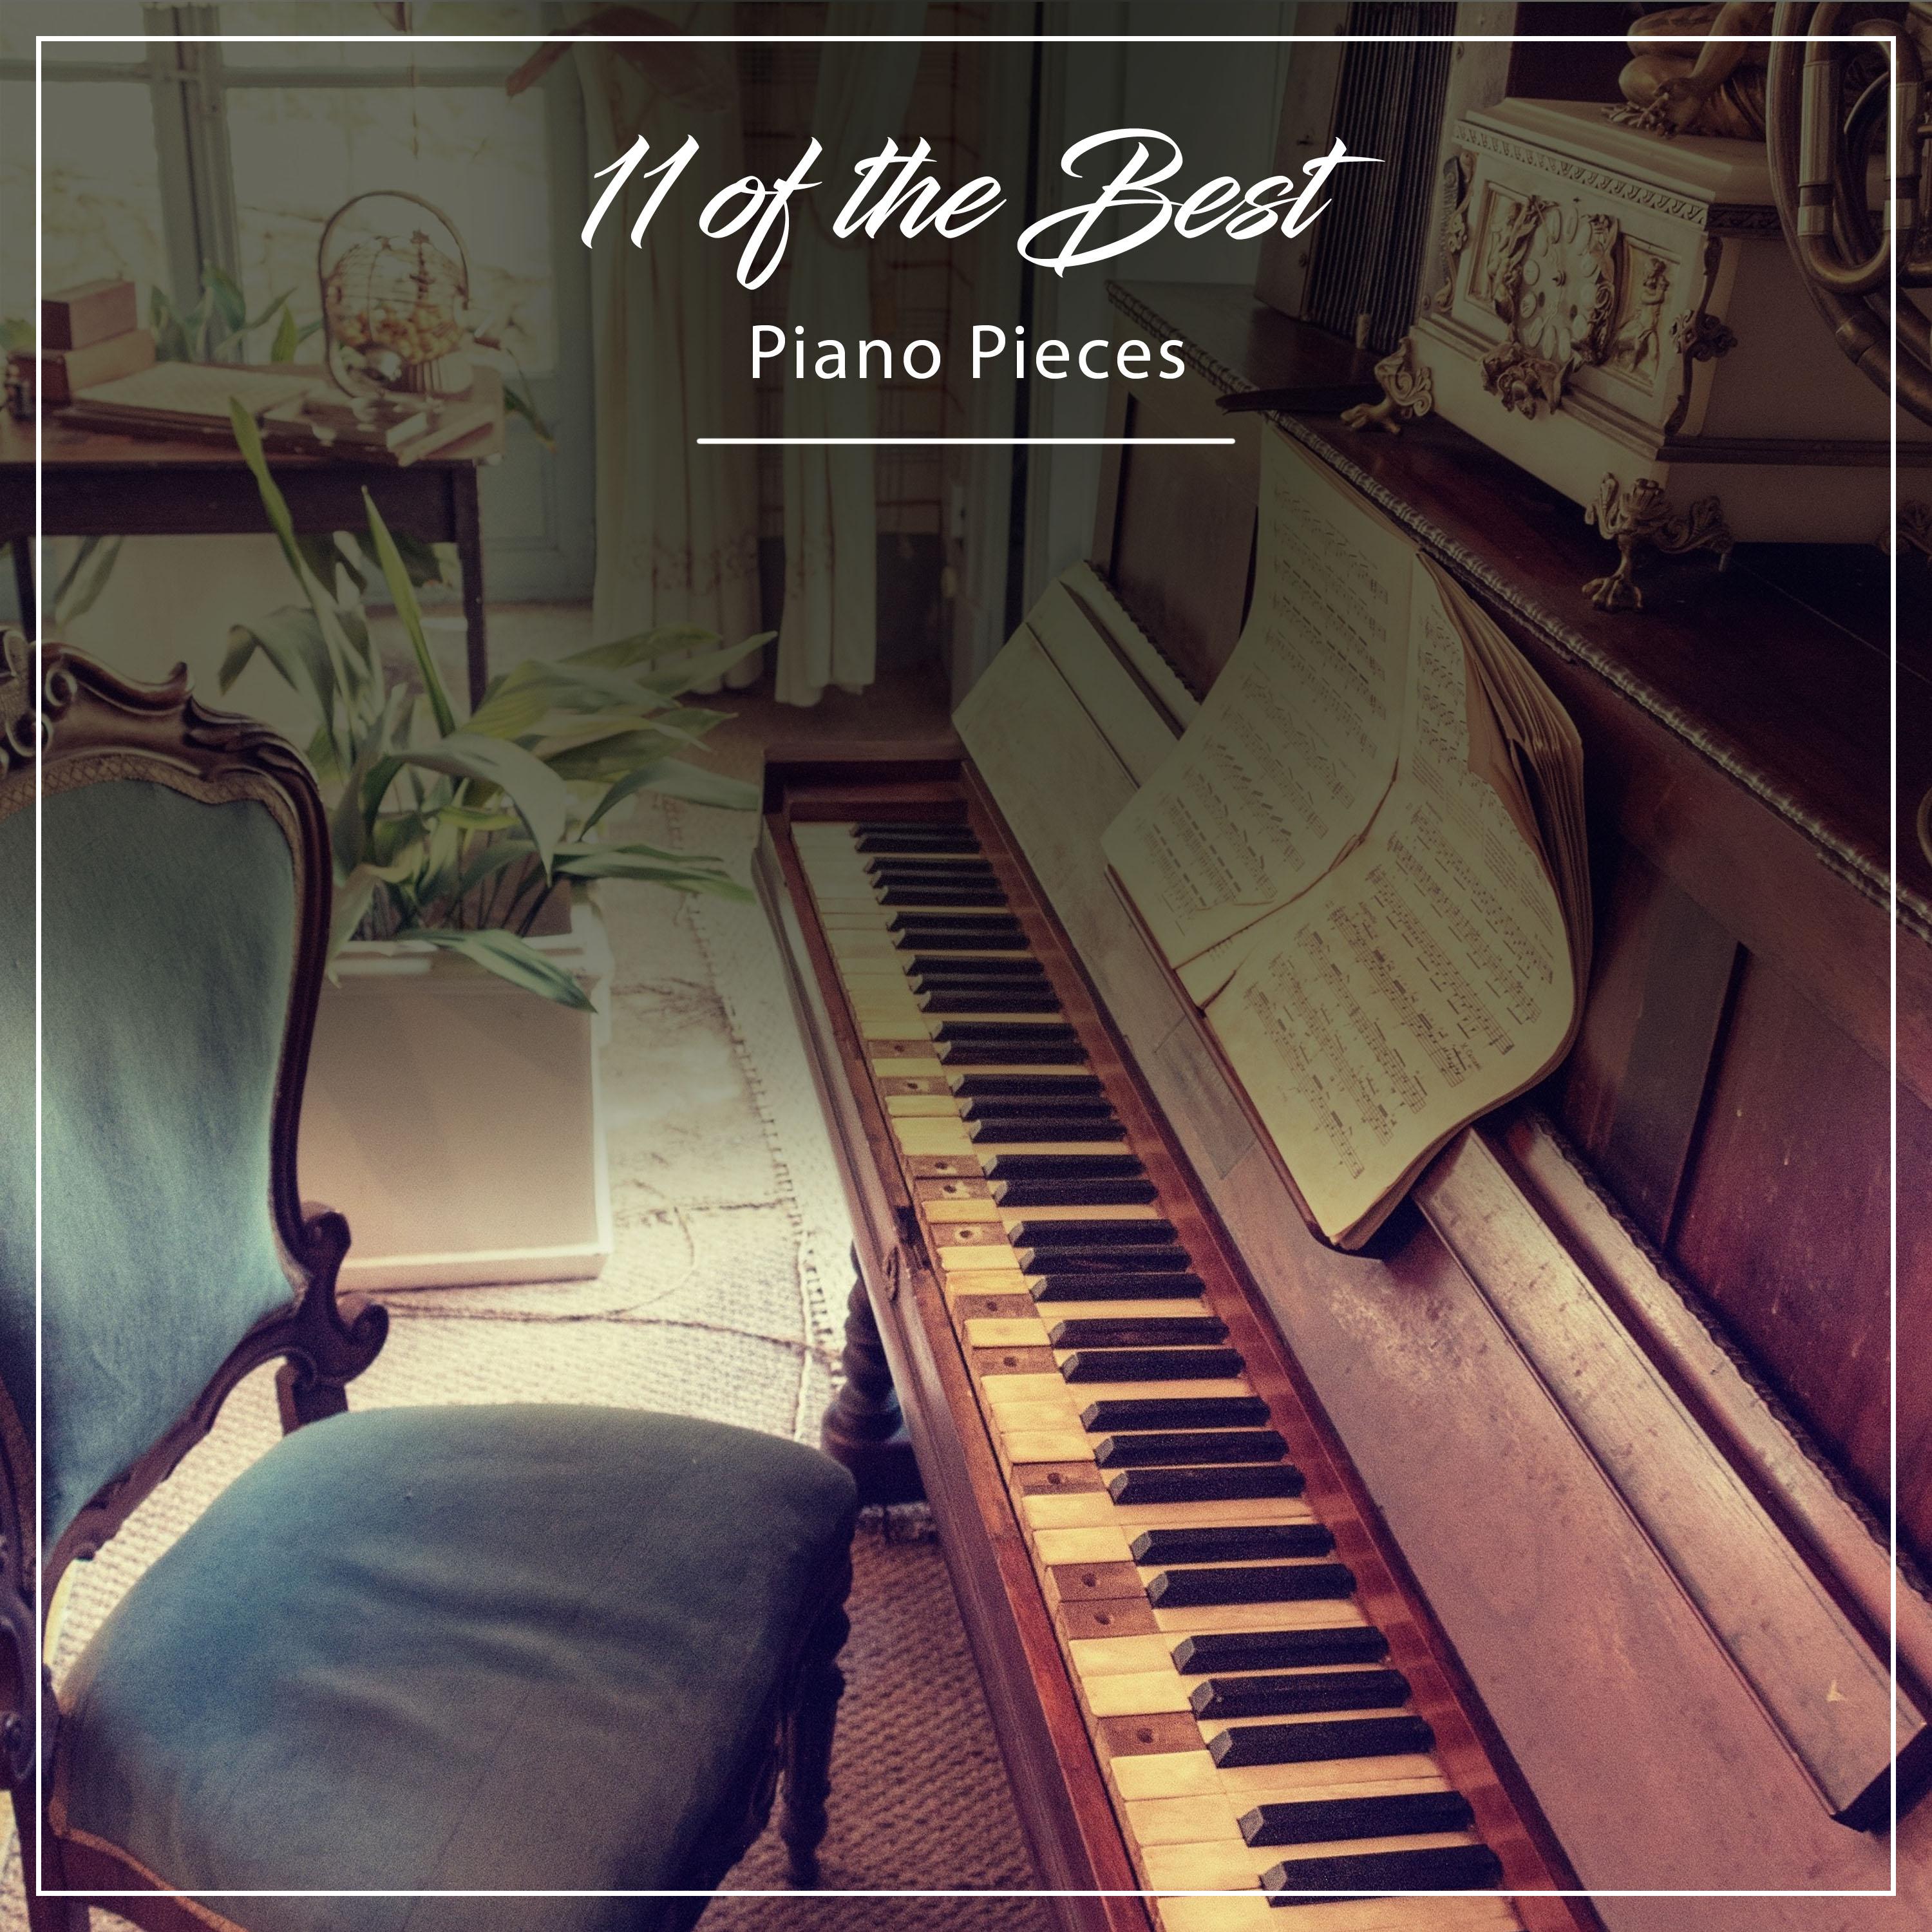 11 of the Best Piano Pieces